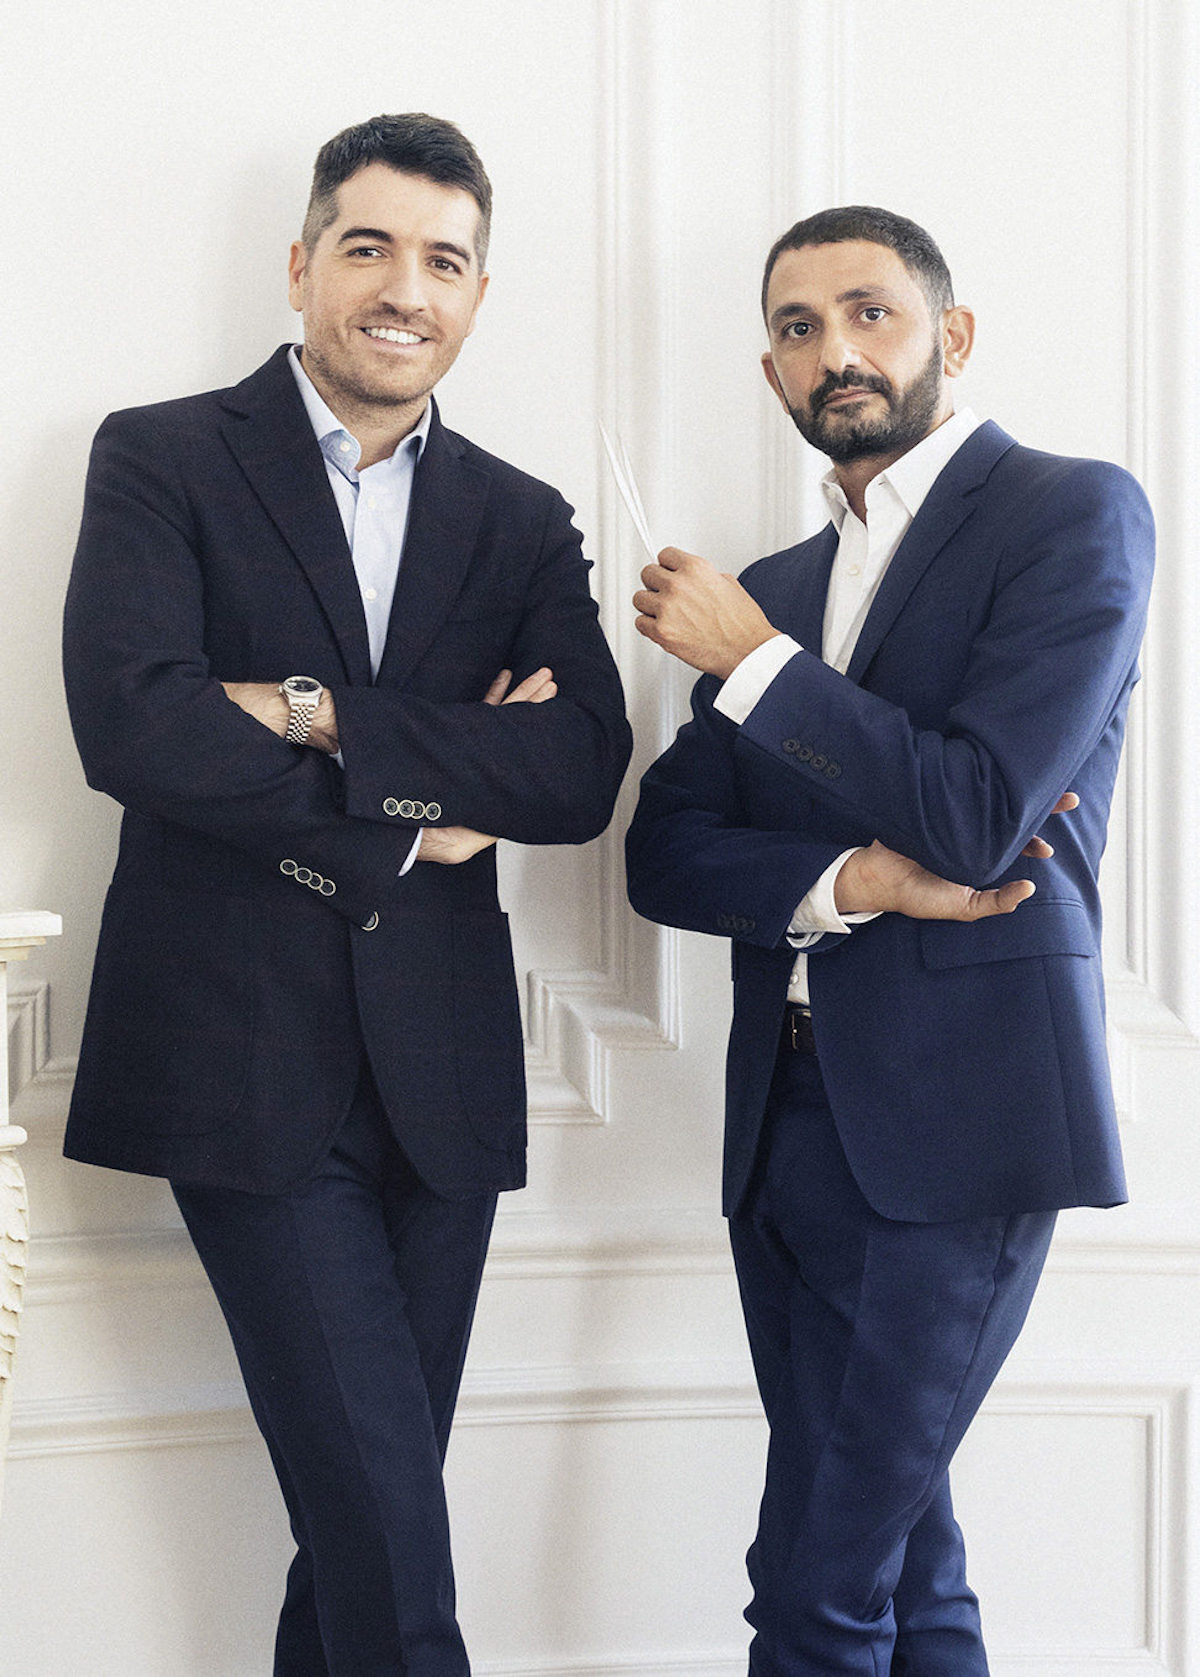 Discussing Maison Francis Kurkdjian's Iconicity with CEO, Marc Chaya